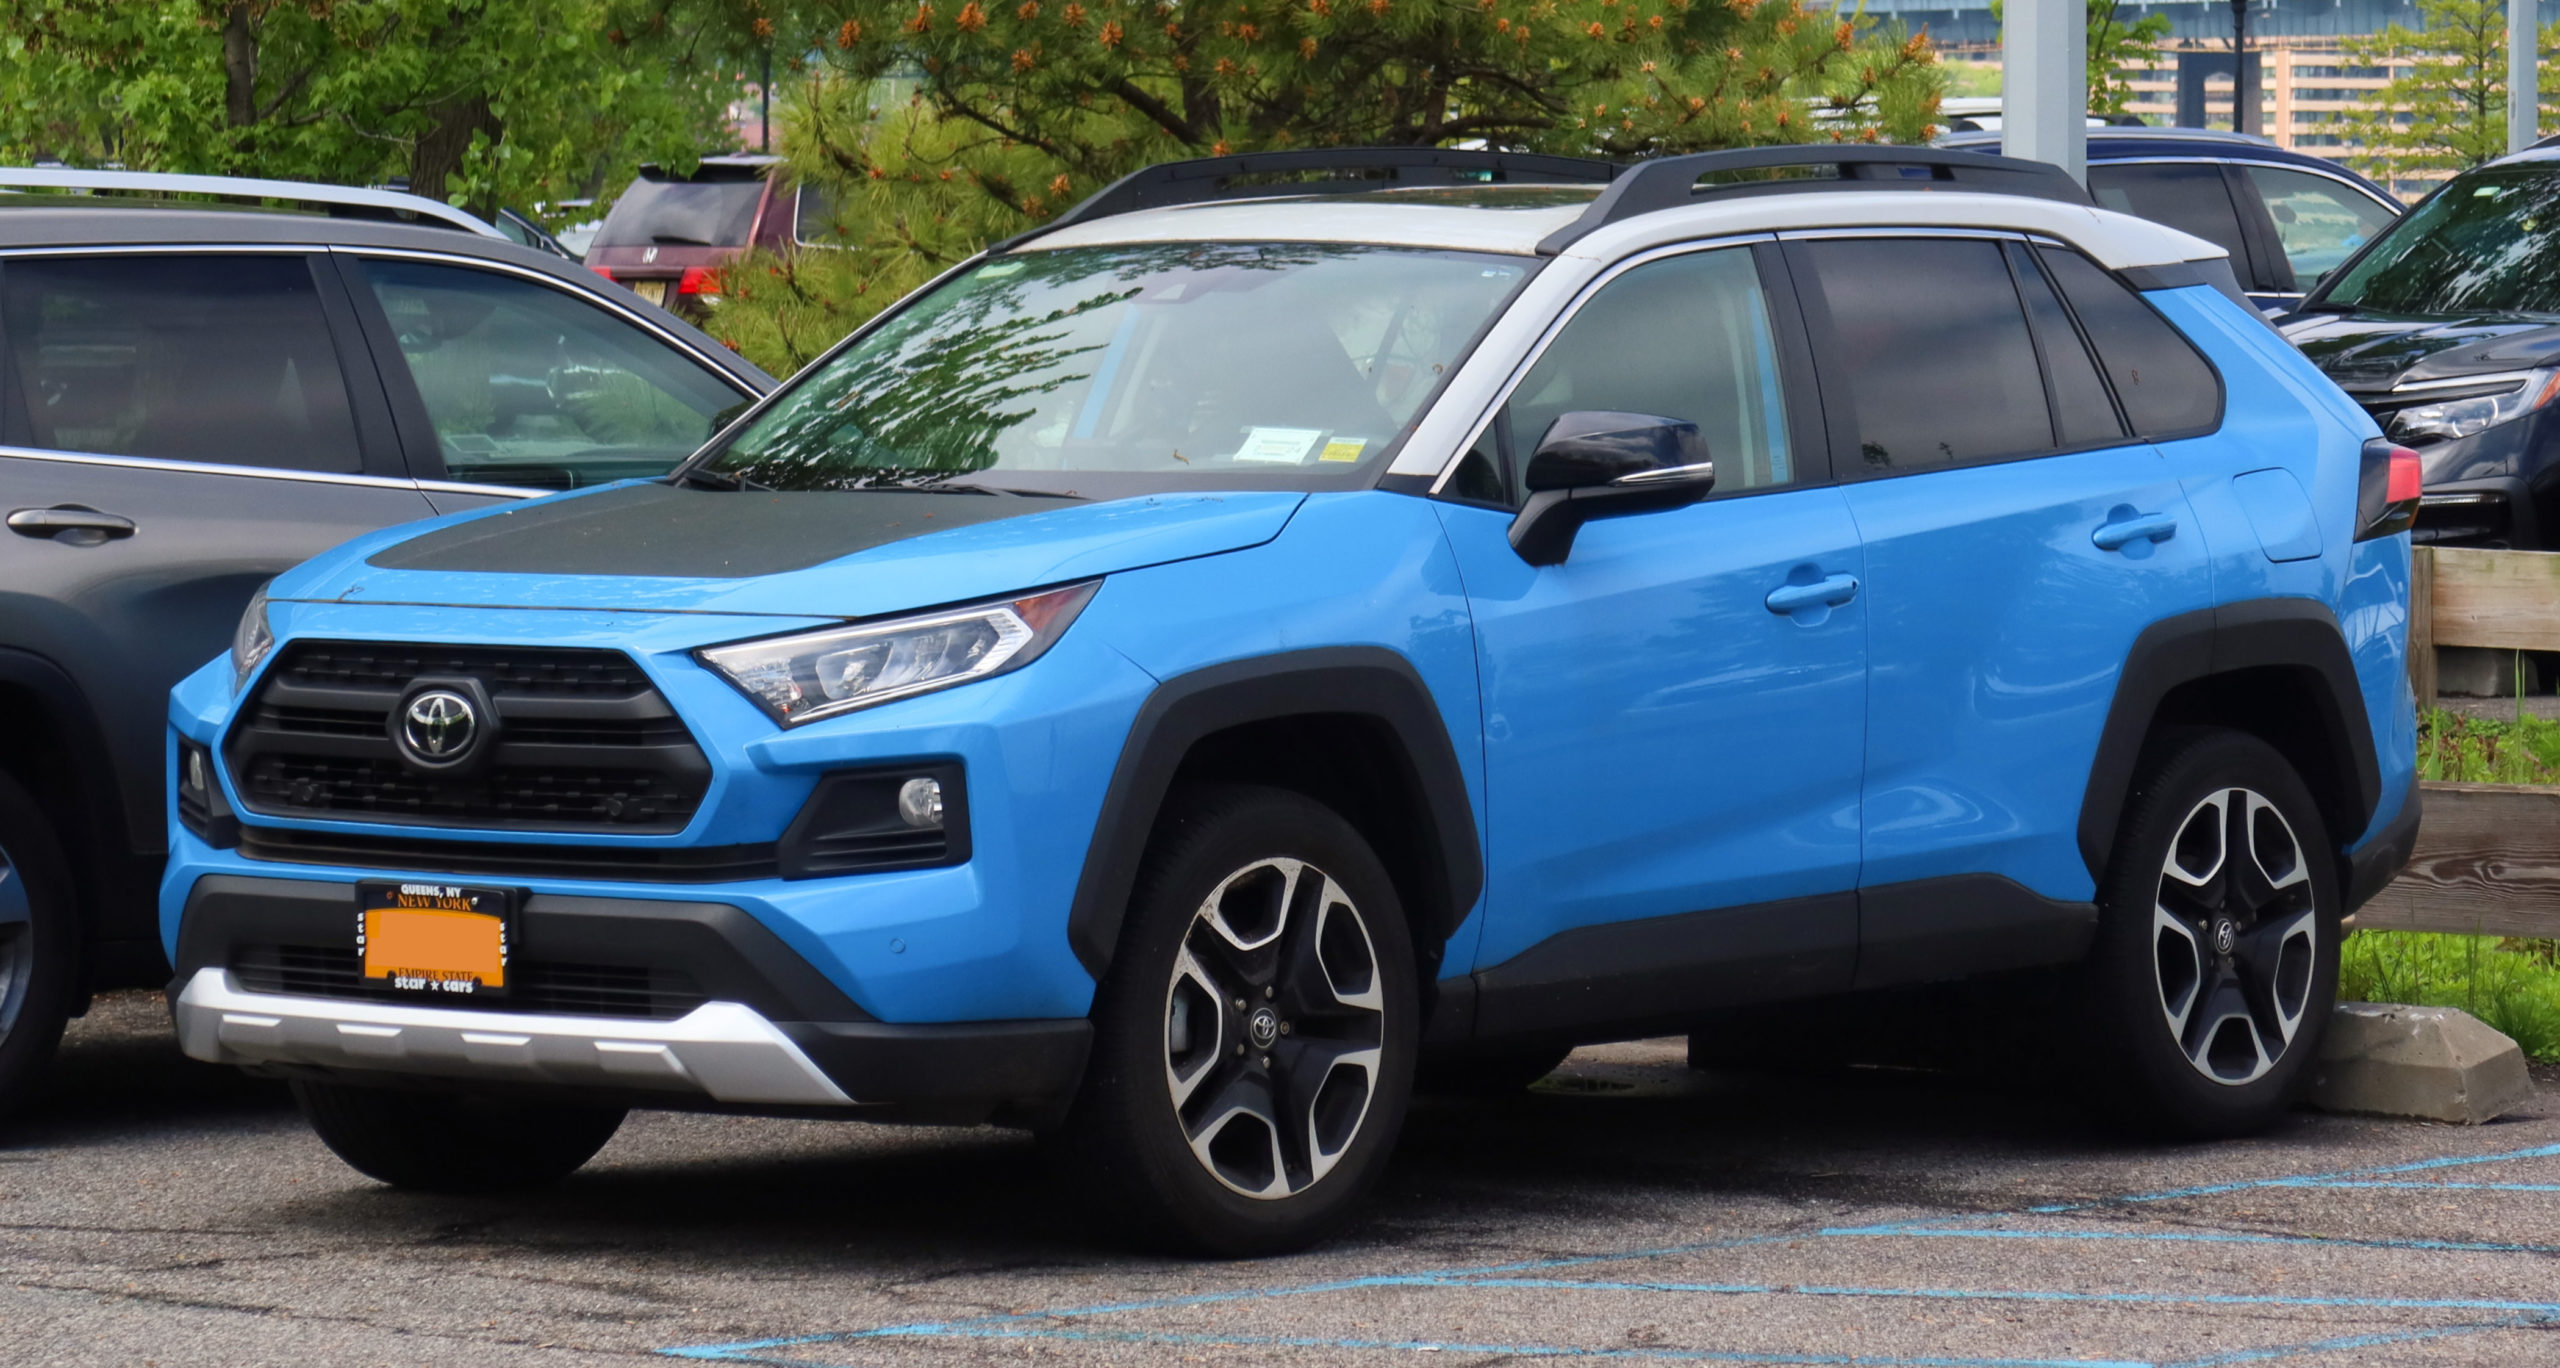 Dubicars Car Spotlight — Toyota Rav4 — All You Need To Know About The